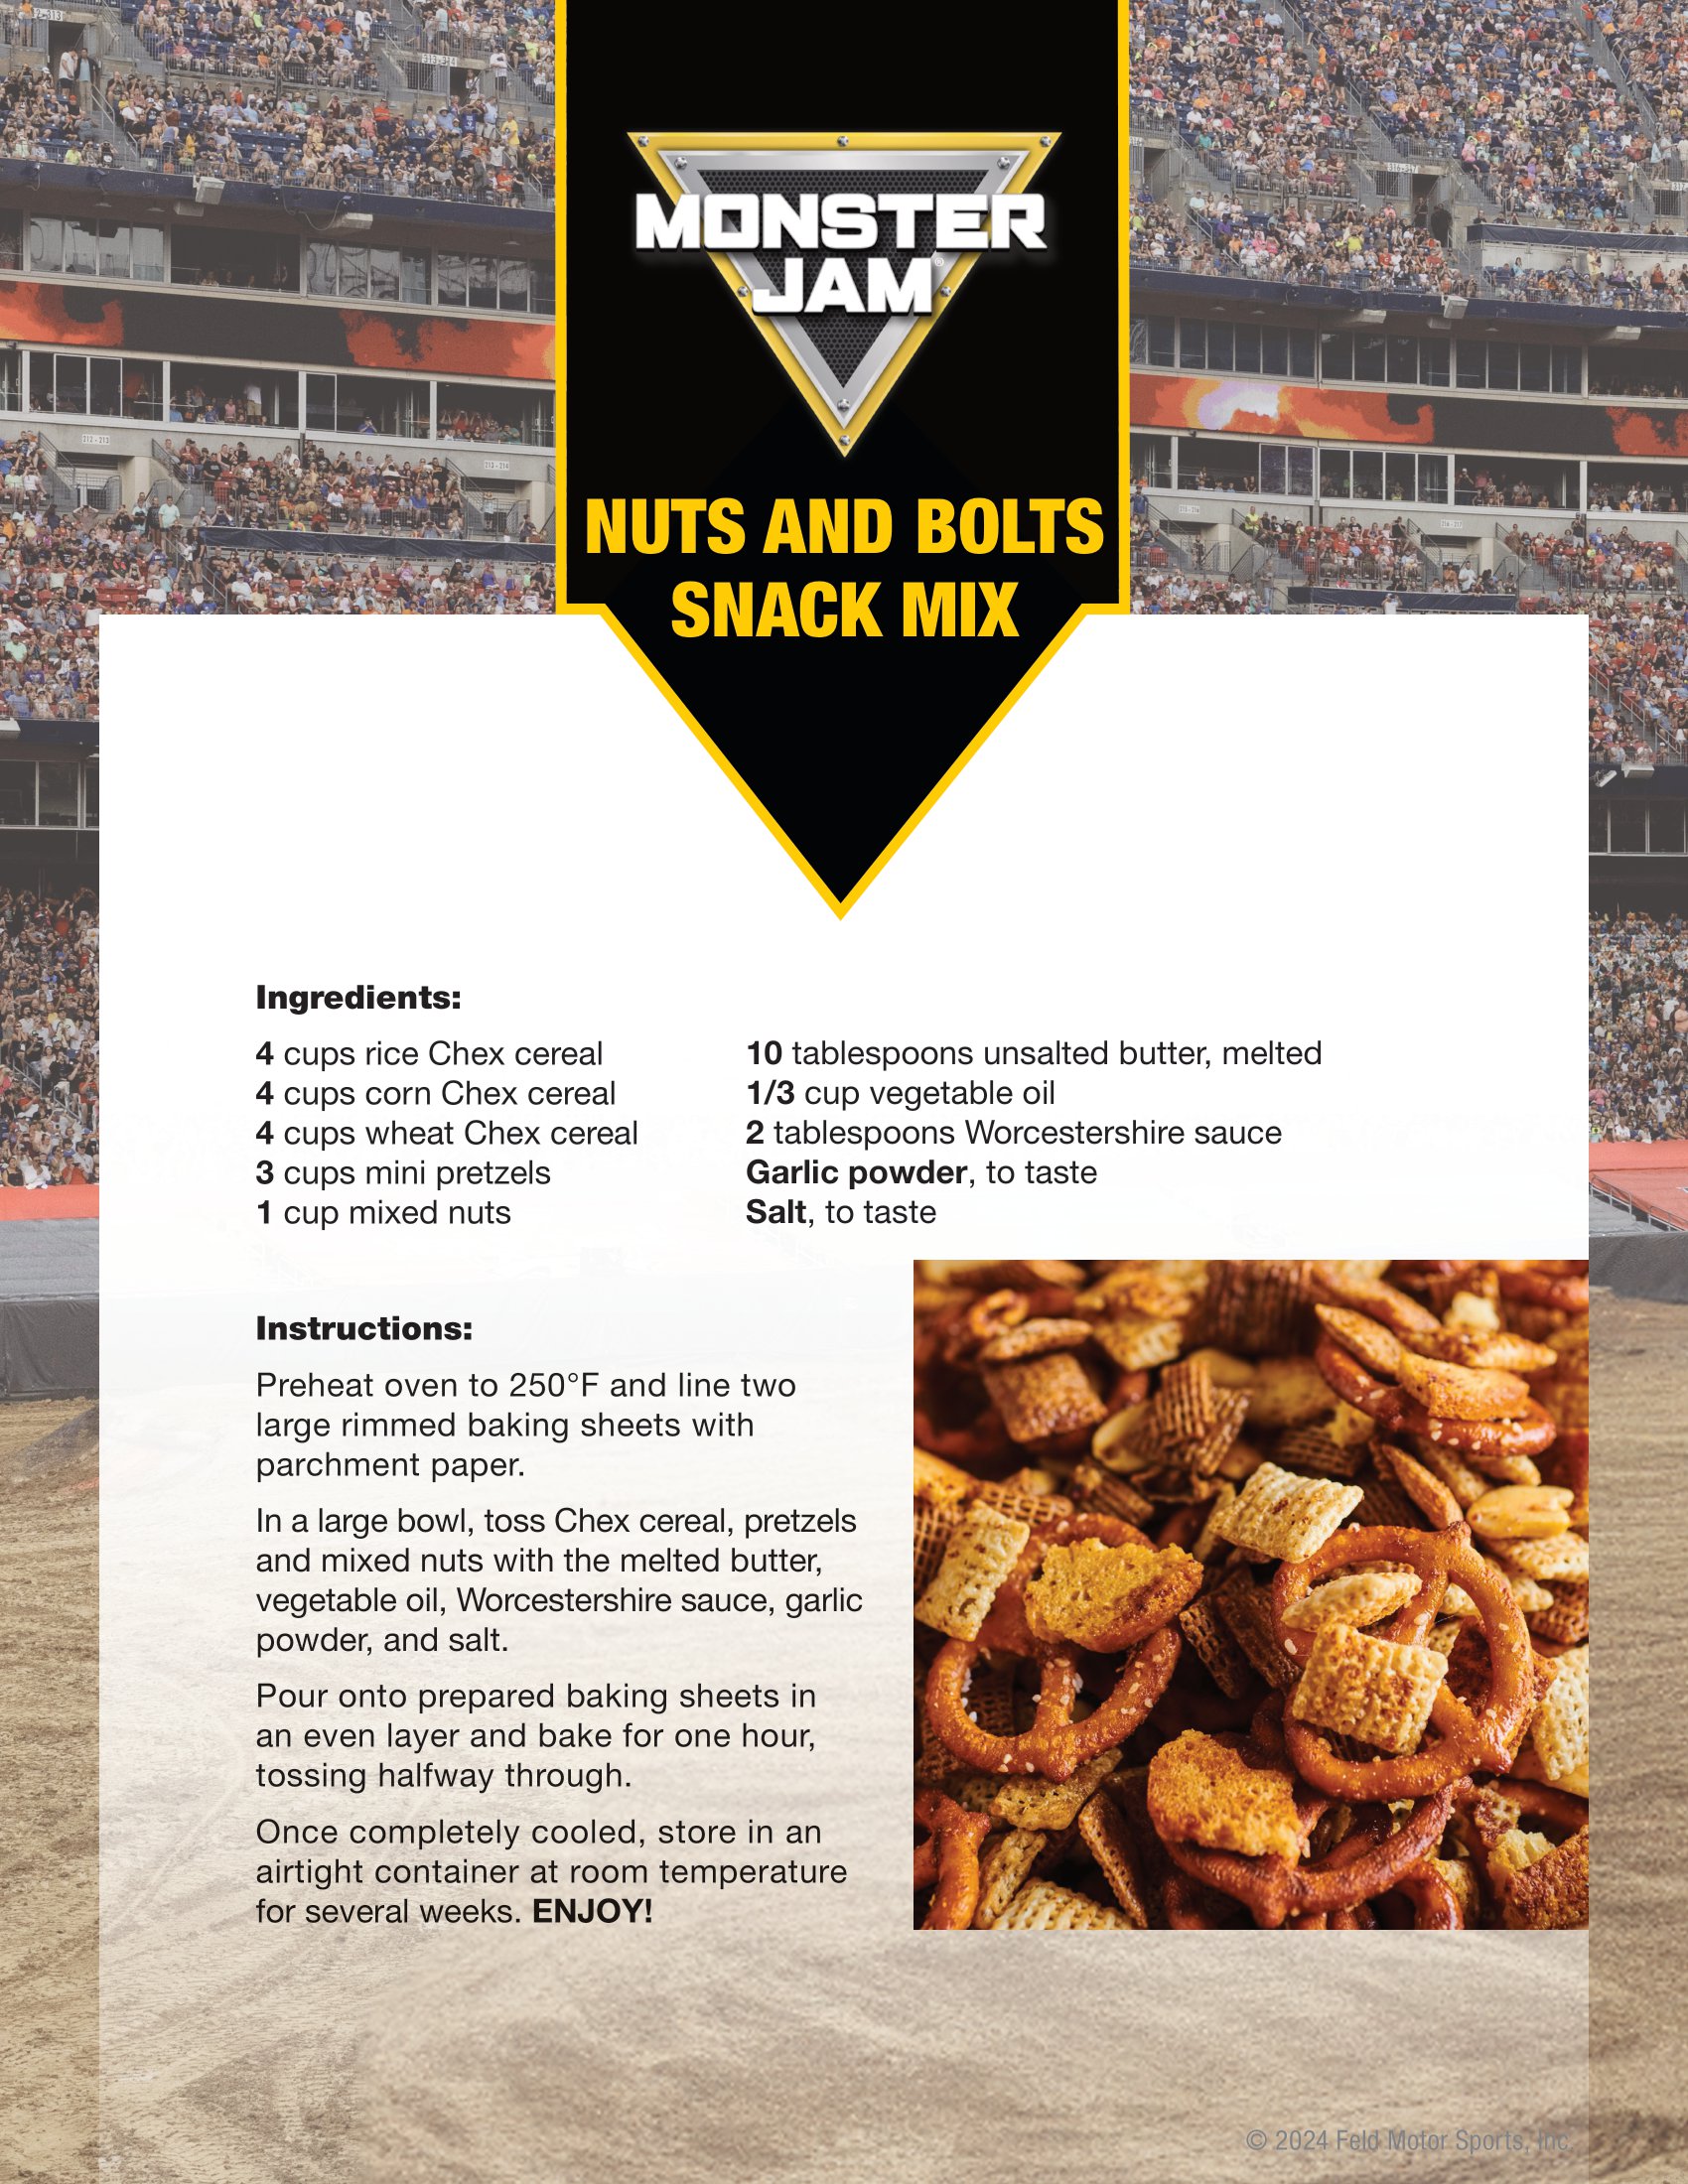 Monster Jam Nuts and Bolts Snack Mix